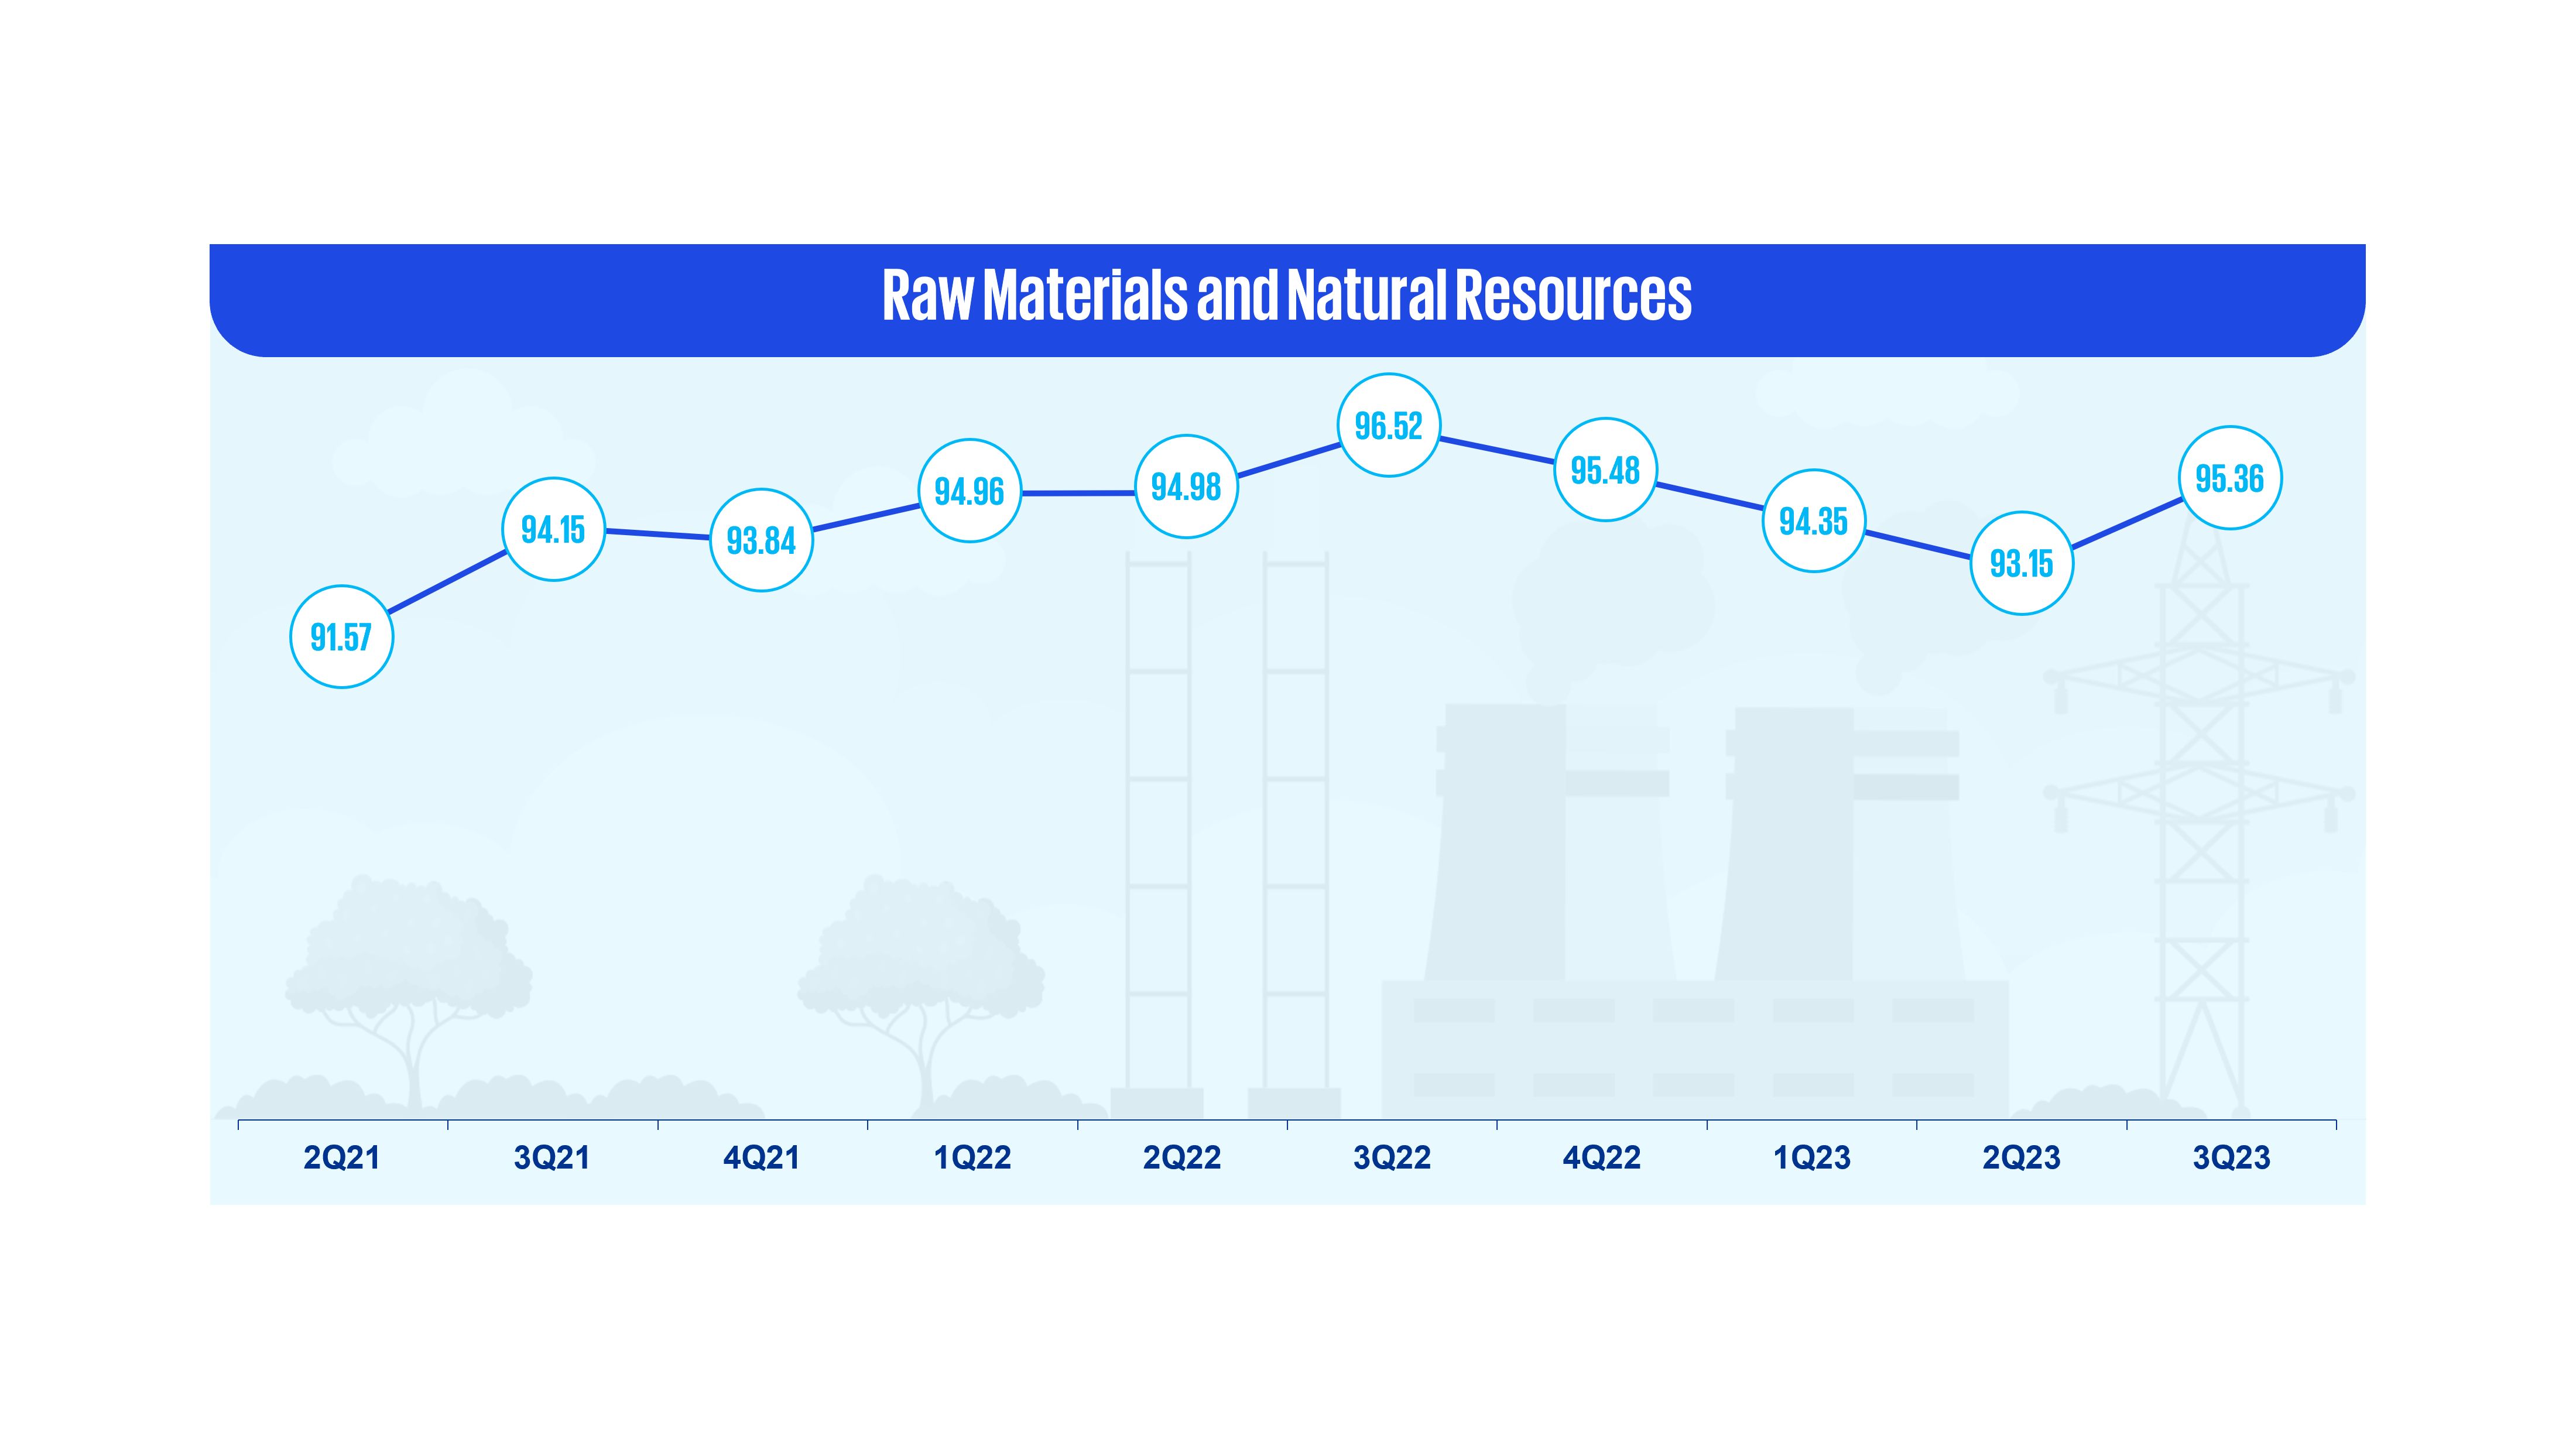 Raw materials and natural resources